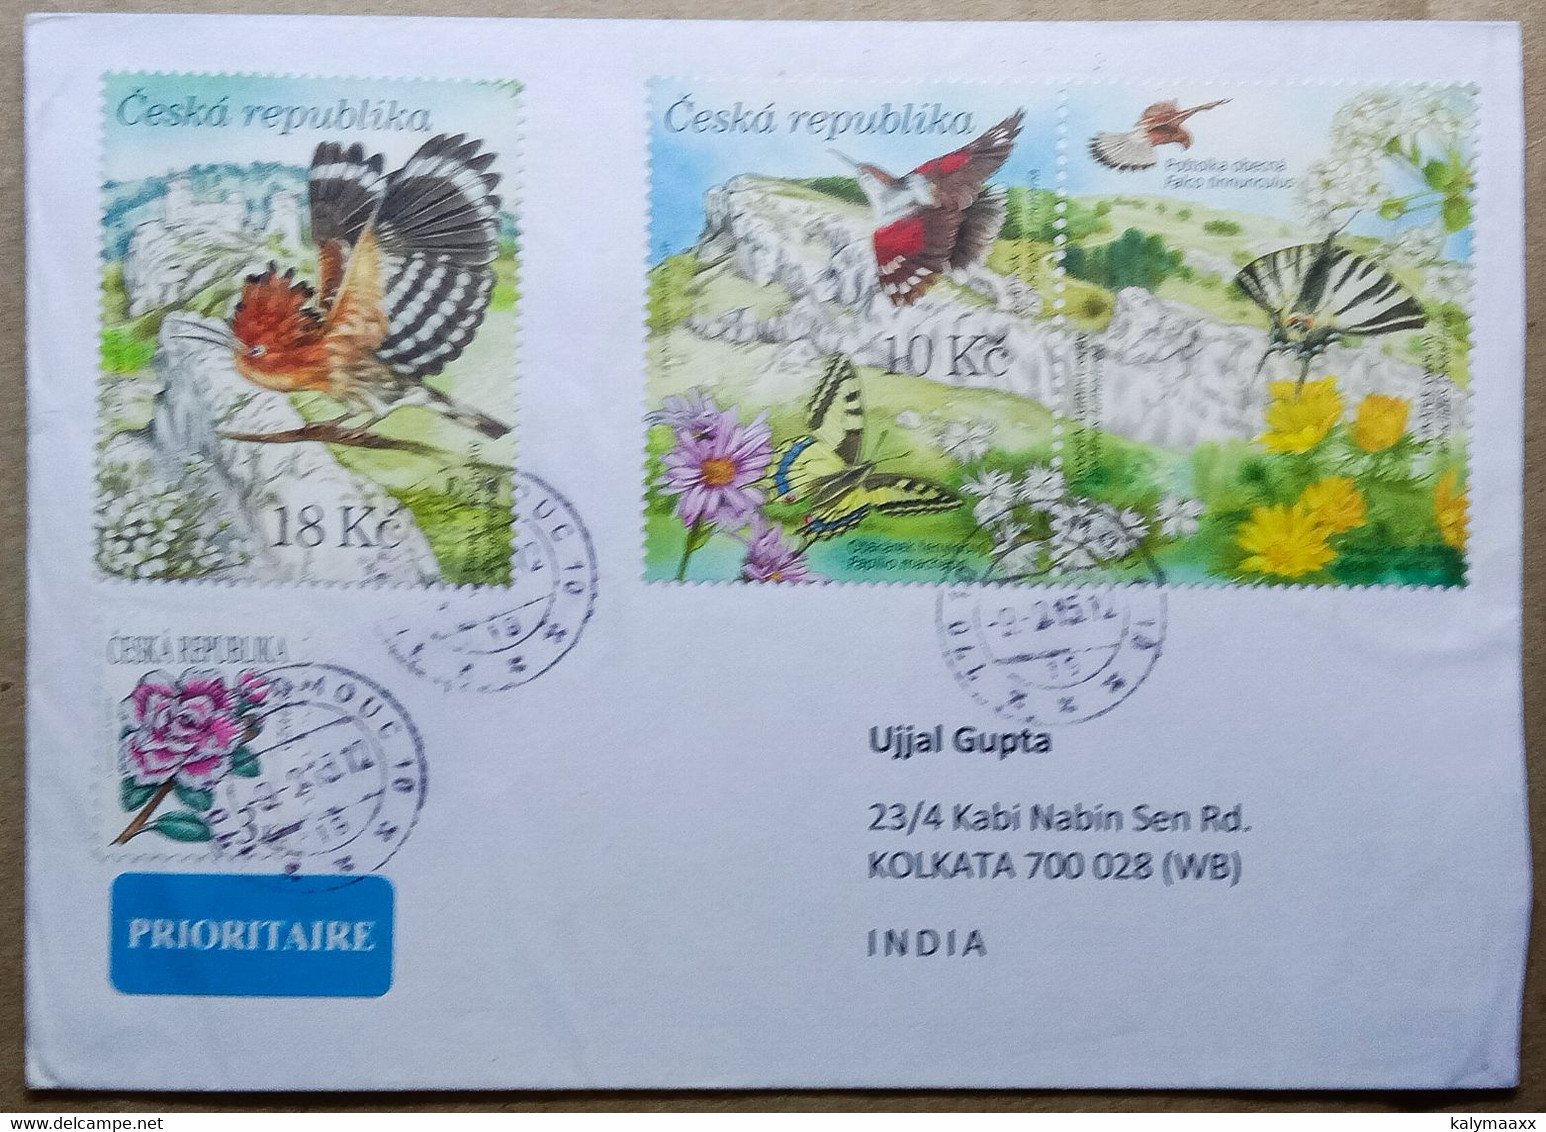 CZECH REPUBLIC TO INDIA 2012 COMMERCIAL USED COVER, BIRDS, BUTTERFLY, FLOWERS, FLORA & FAUNA - Storia Postale